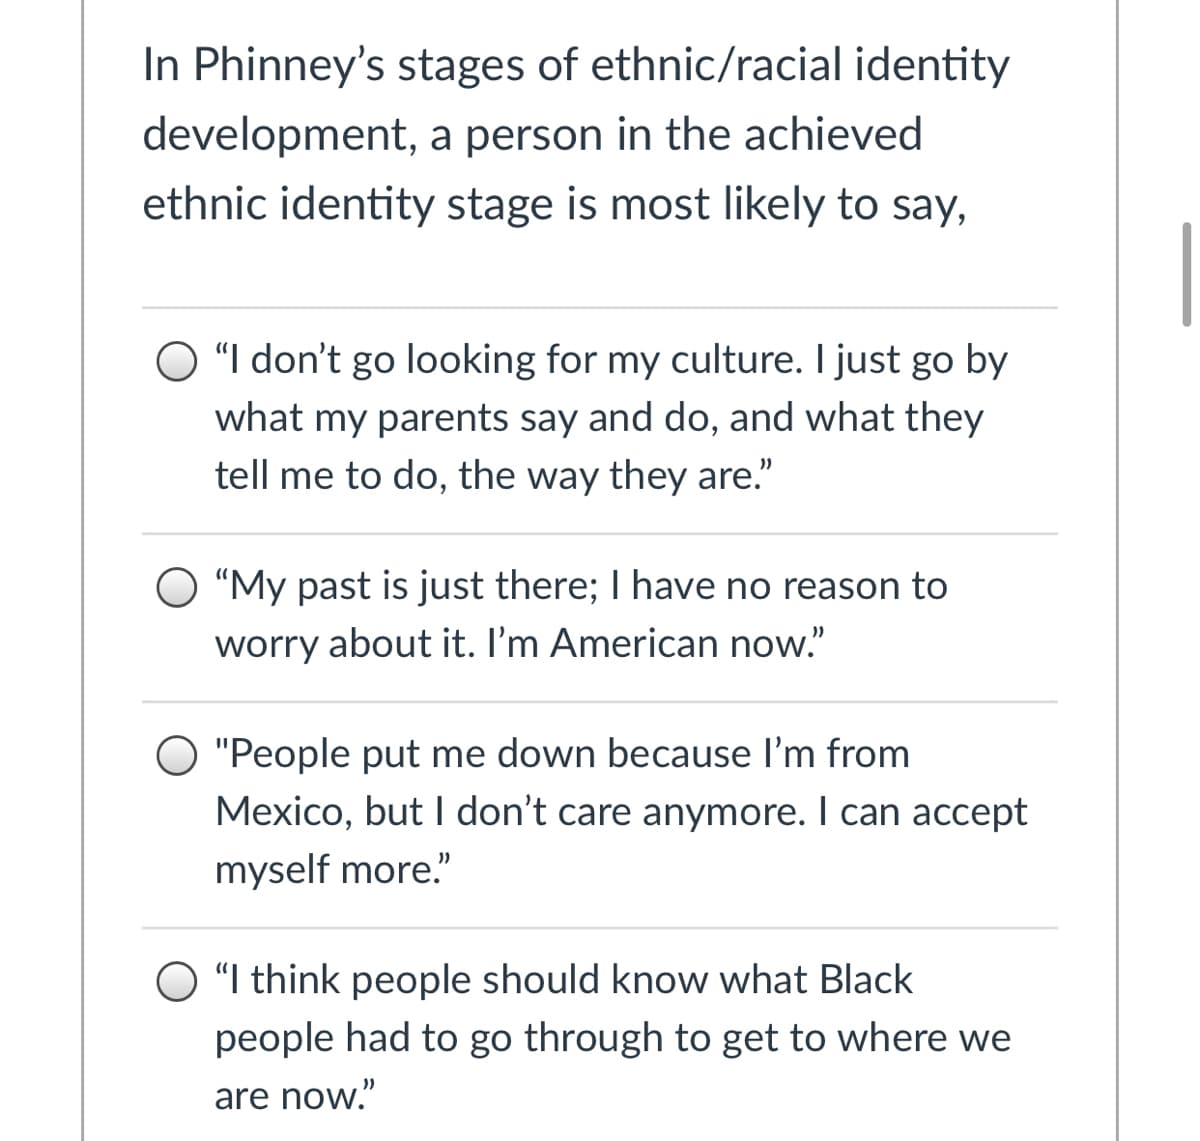 In Phinney's stages of ethnic/racial identity
development, a person in the achieved
ethnic identity stage is most likely to say,
"I don't go looking for my culture. I just go by
what my parents say and do, and what they
tell me to do, the way they are."
"My past is just there; I have no reason to
worry about it. I'm American now."
"People put me down because l'm from
Mexico, but I don't care anymore. I can accept
myself more."
"I think people should know what Black
people had to go through to get to where we
are now."
